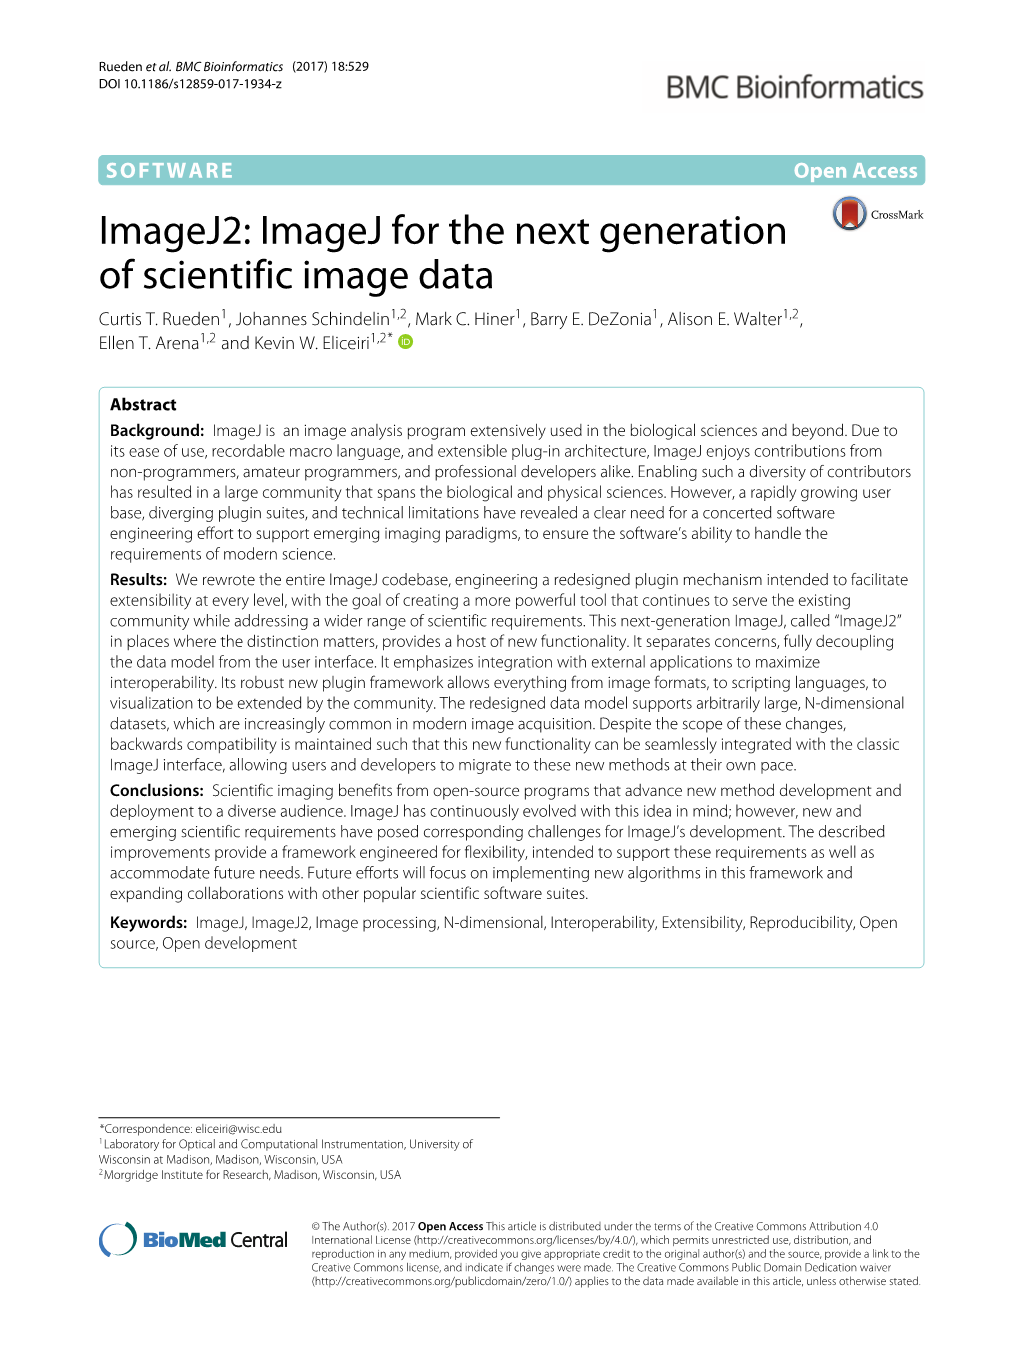 Imagej2: Imagej for the Next Generation of Scientific Image Data Curtis T